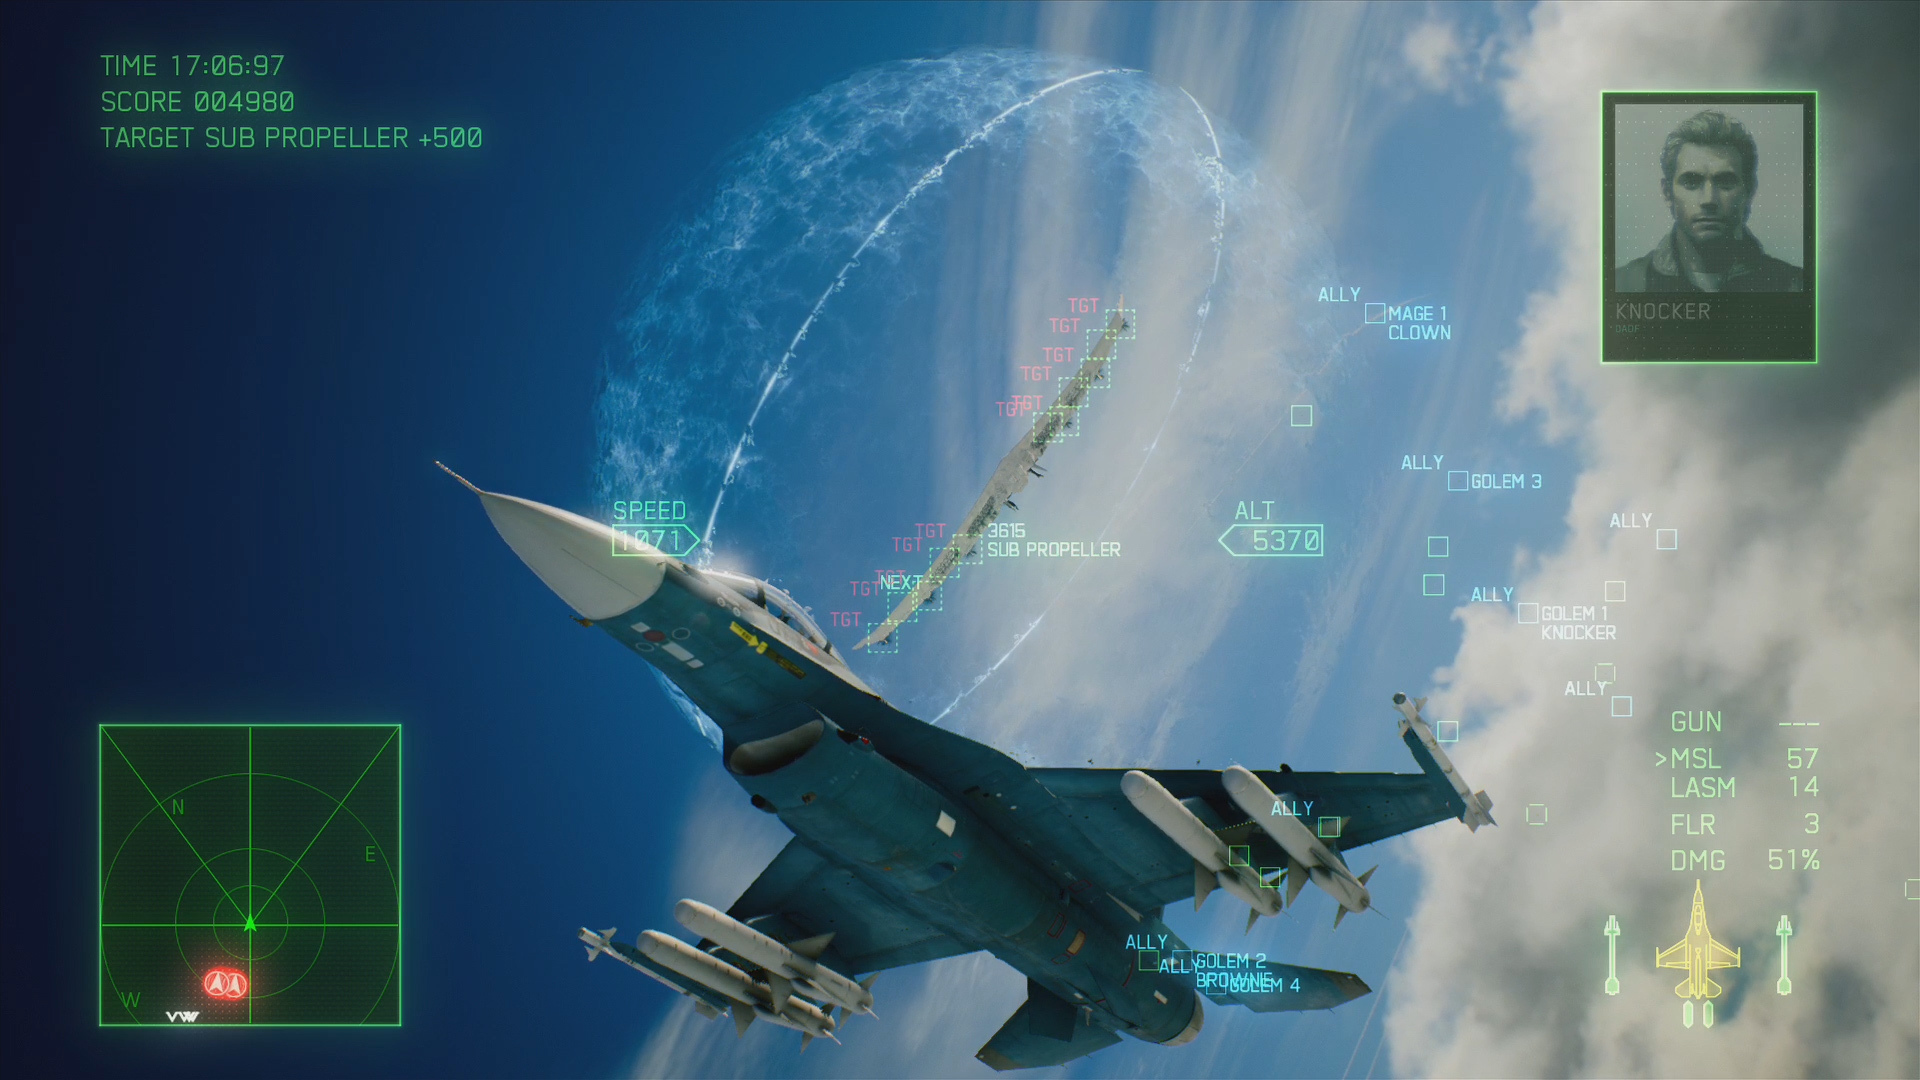 Ace Combat 7: Skies Unknown Review –